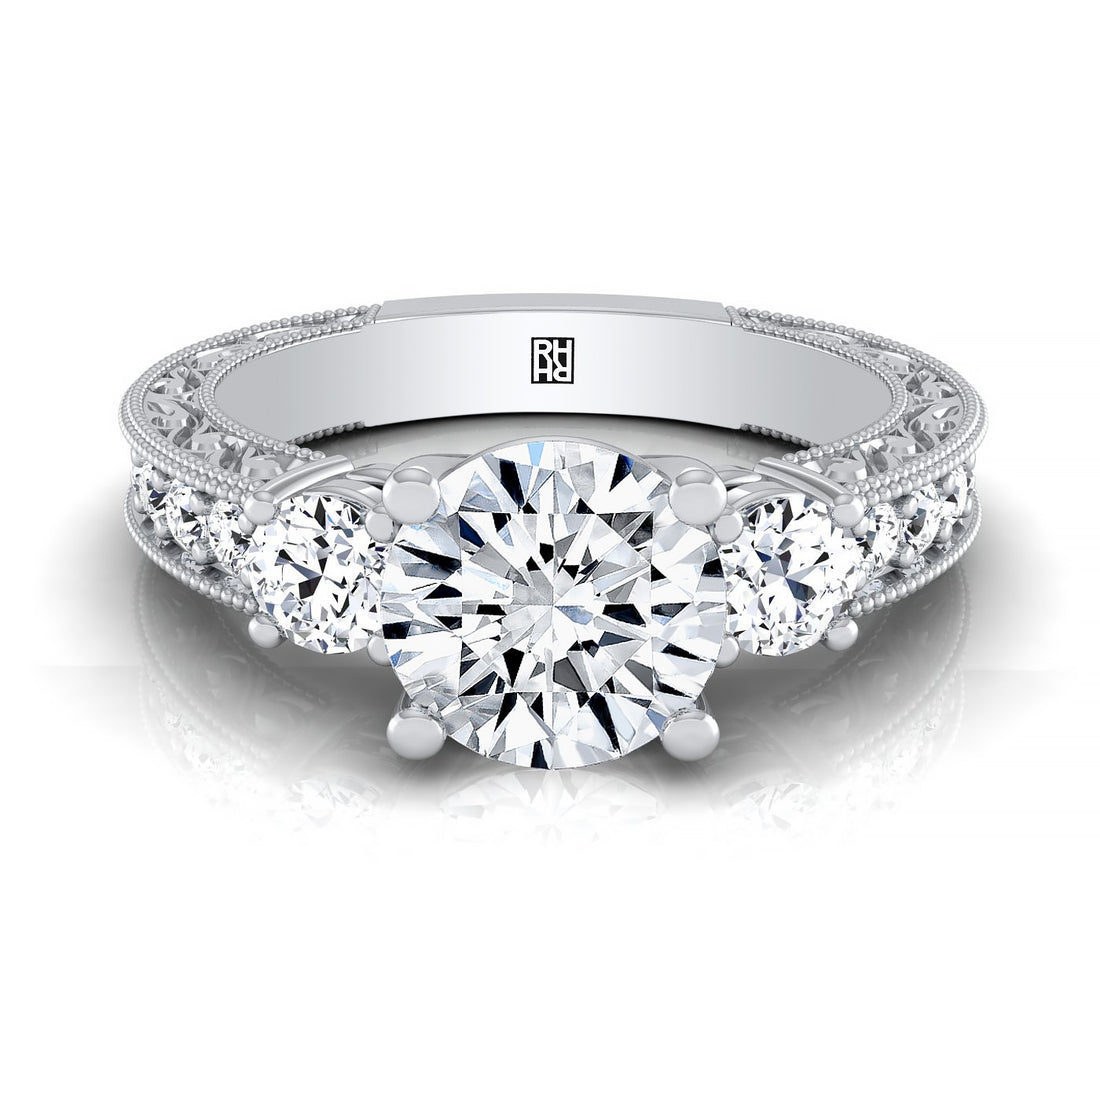 How to Value the Diamond Engagement Rings on Sale